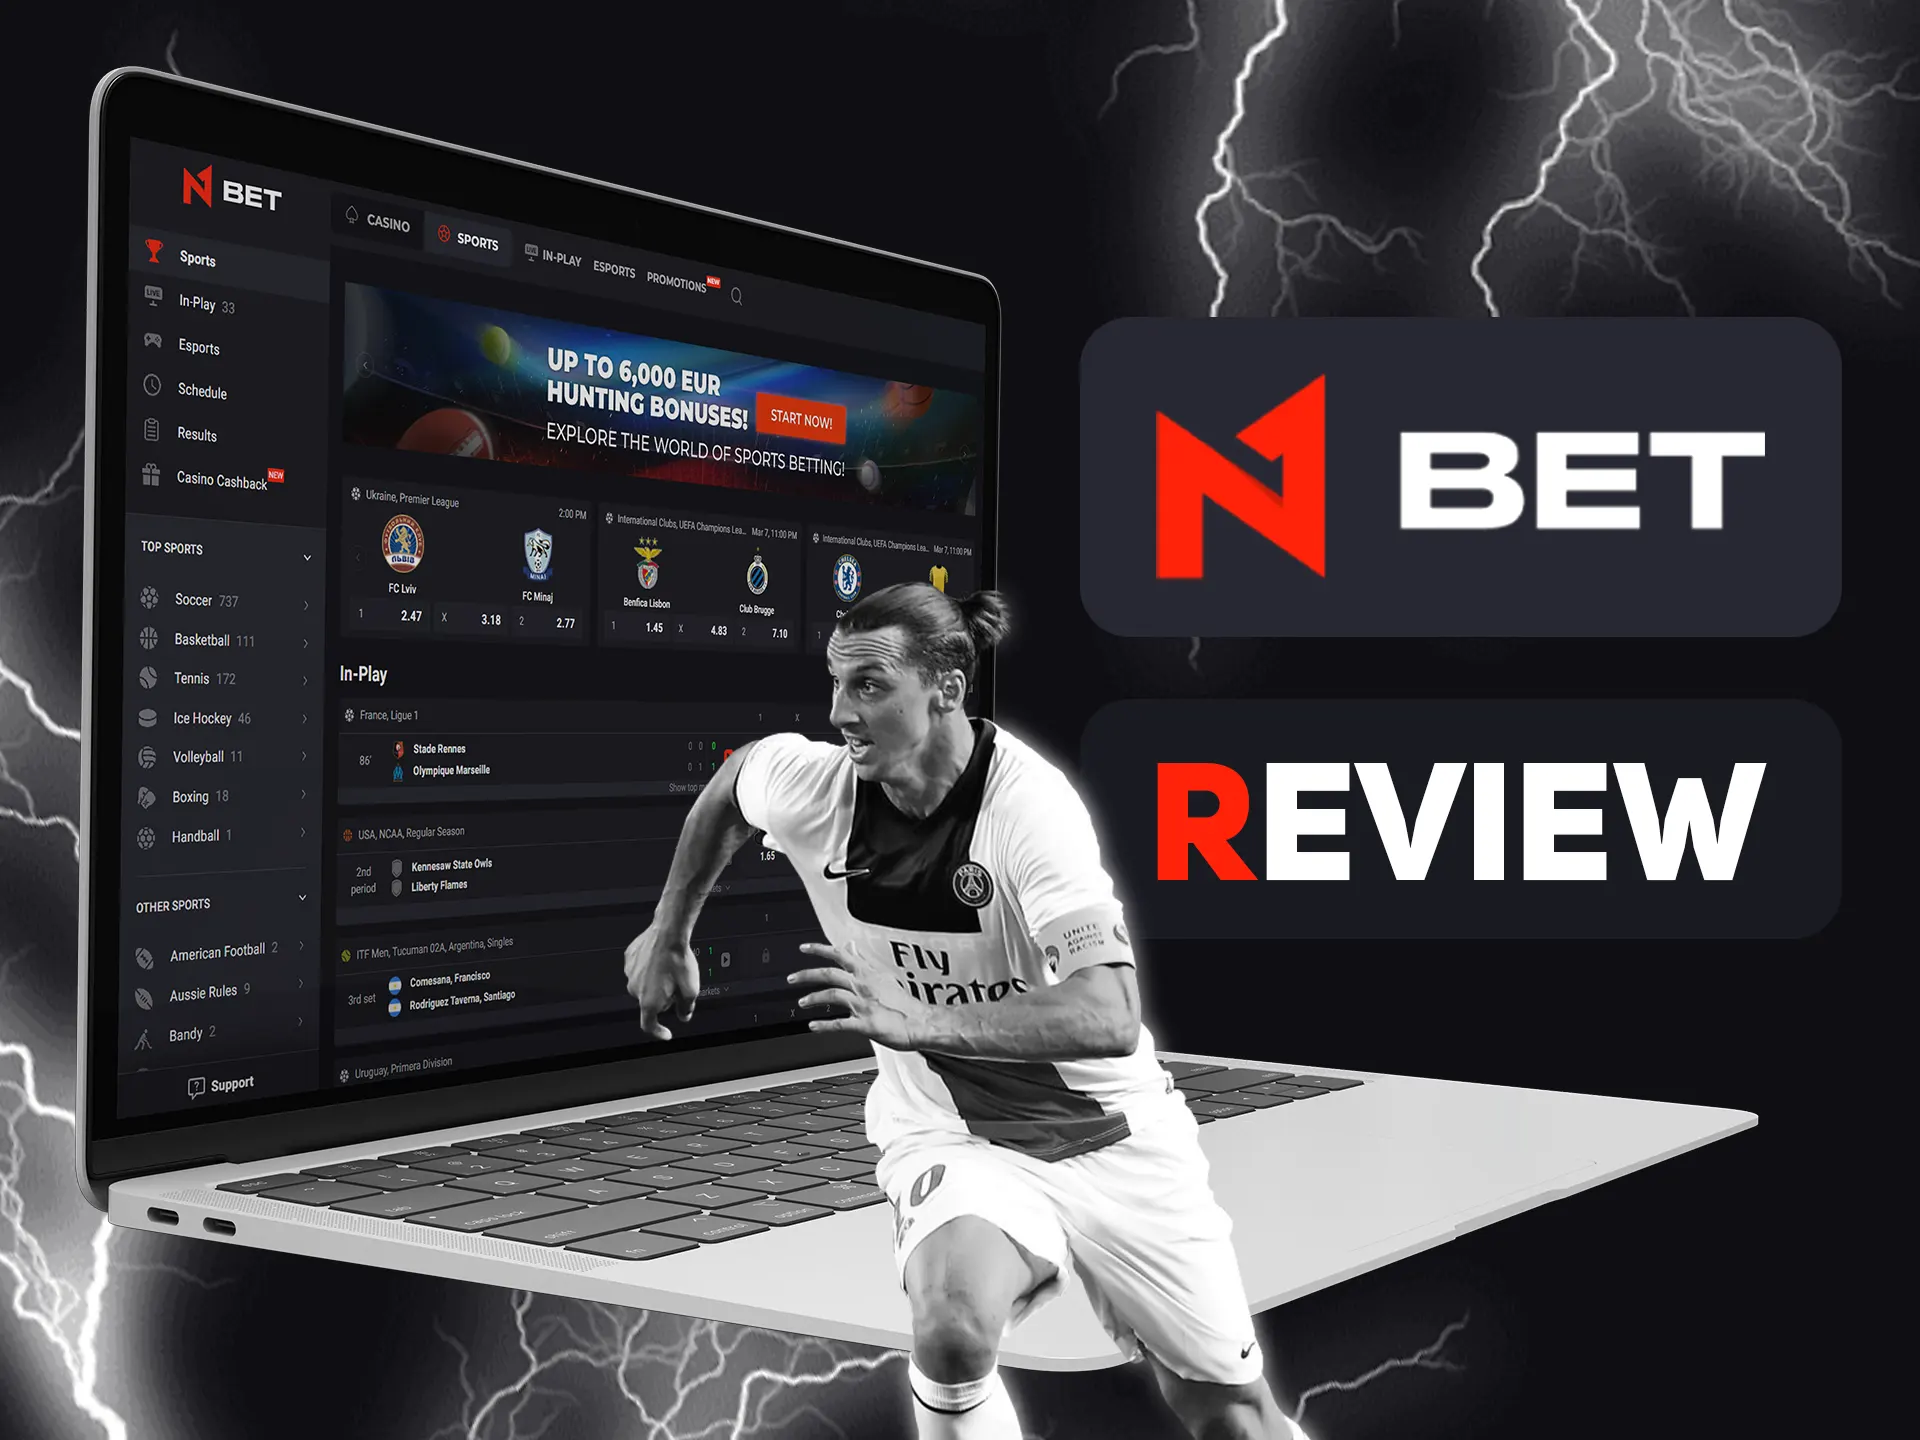 Read our article and start betting at N1bet.